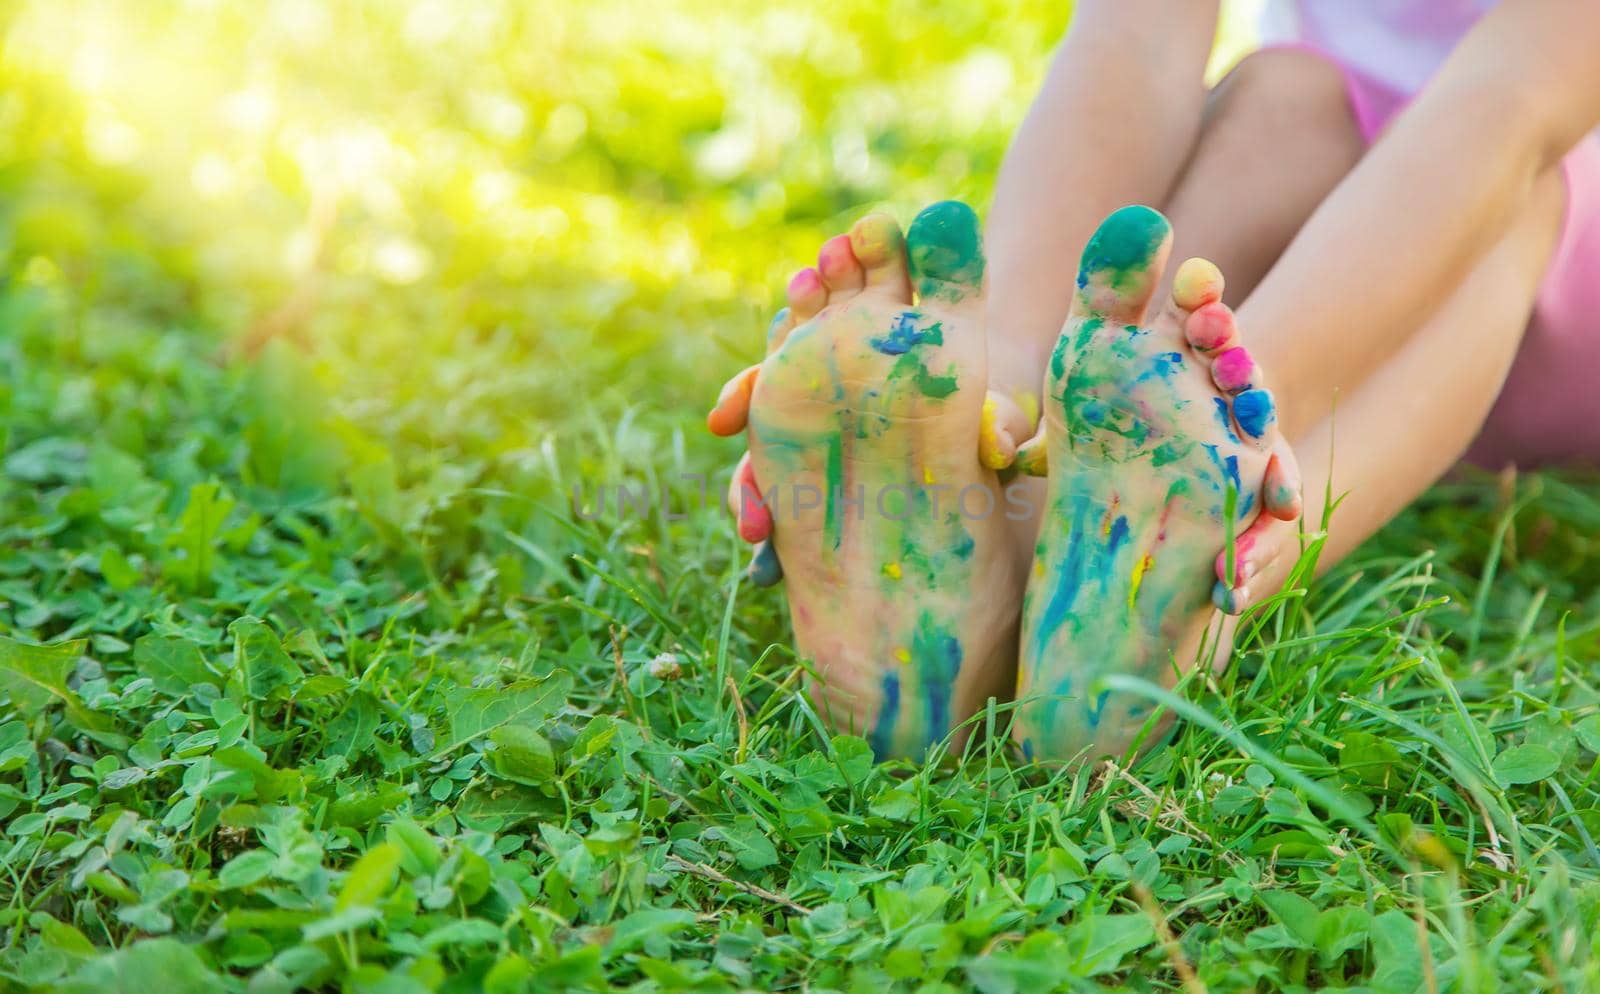 child with painted hands and legs. Selective focus. nature.